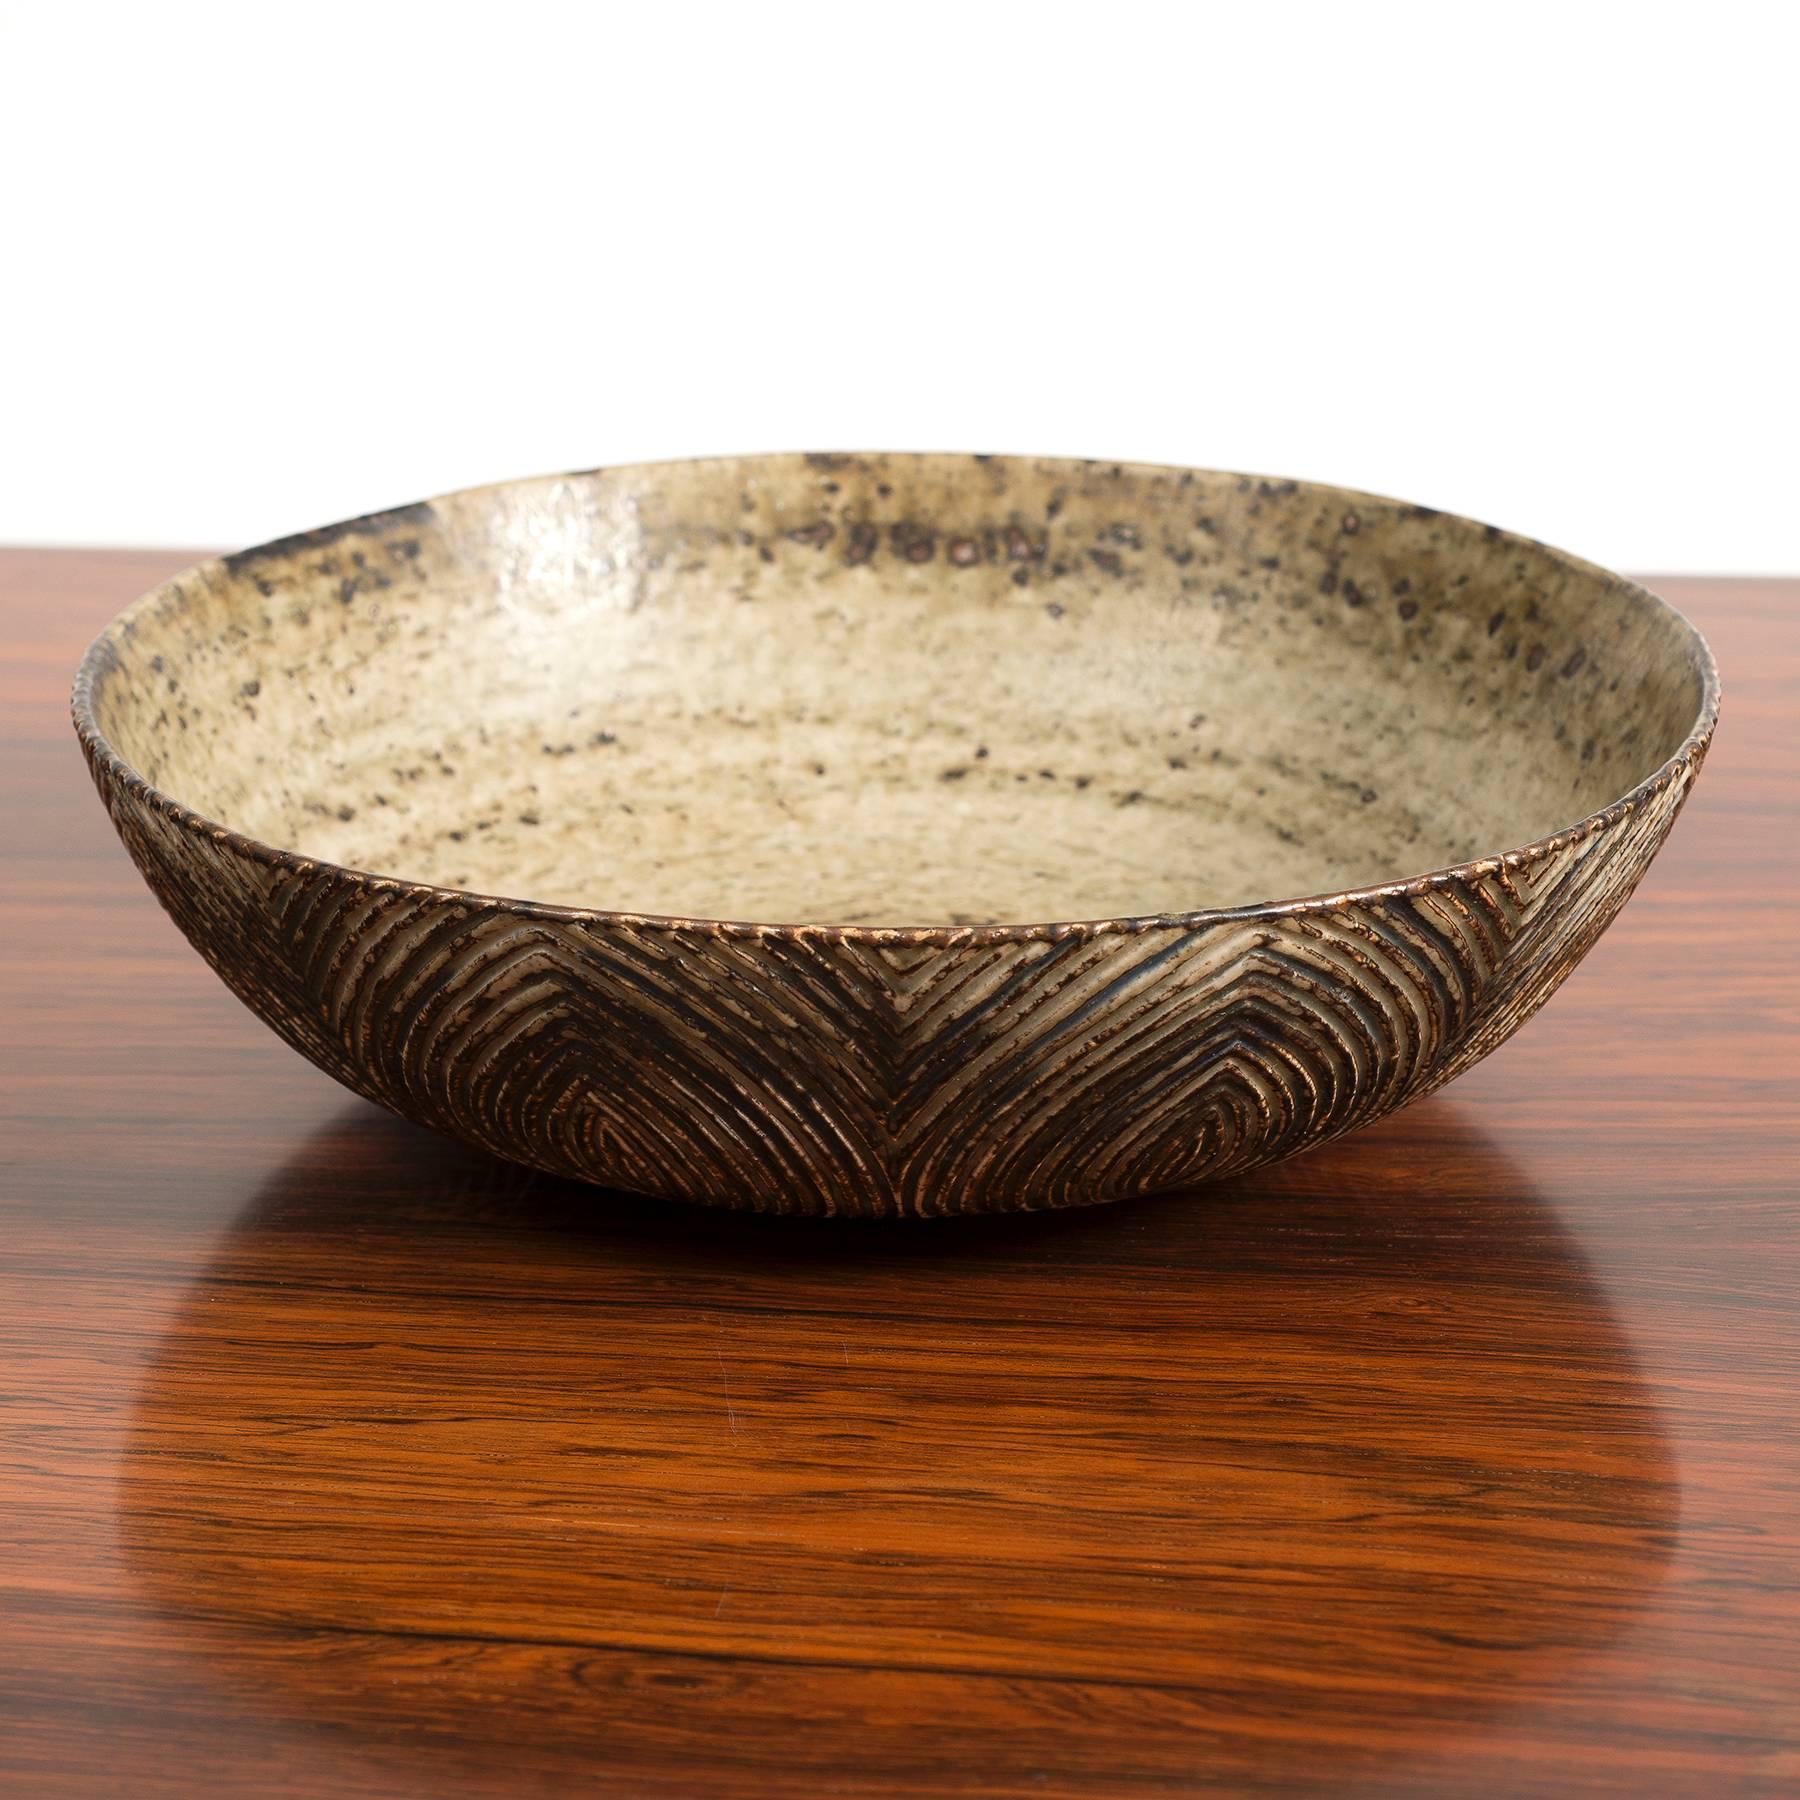 A large stoneware bowl with organic, carved line pattern and sung glaze by Axel Salto for Royal Copenhagen, Denmark, 1940s. Signed SALTO 20722.